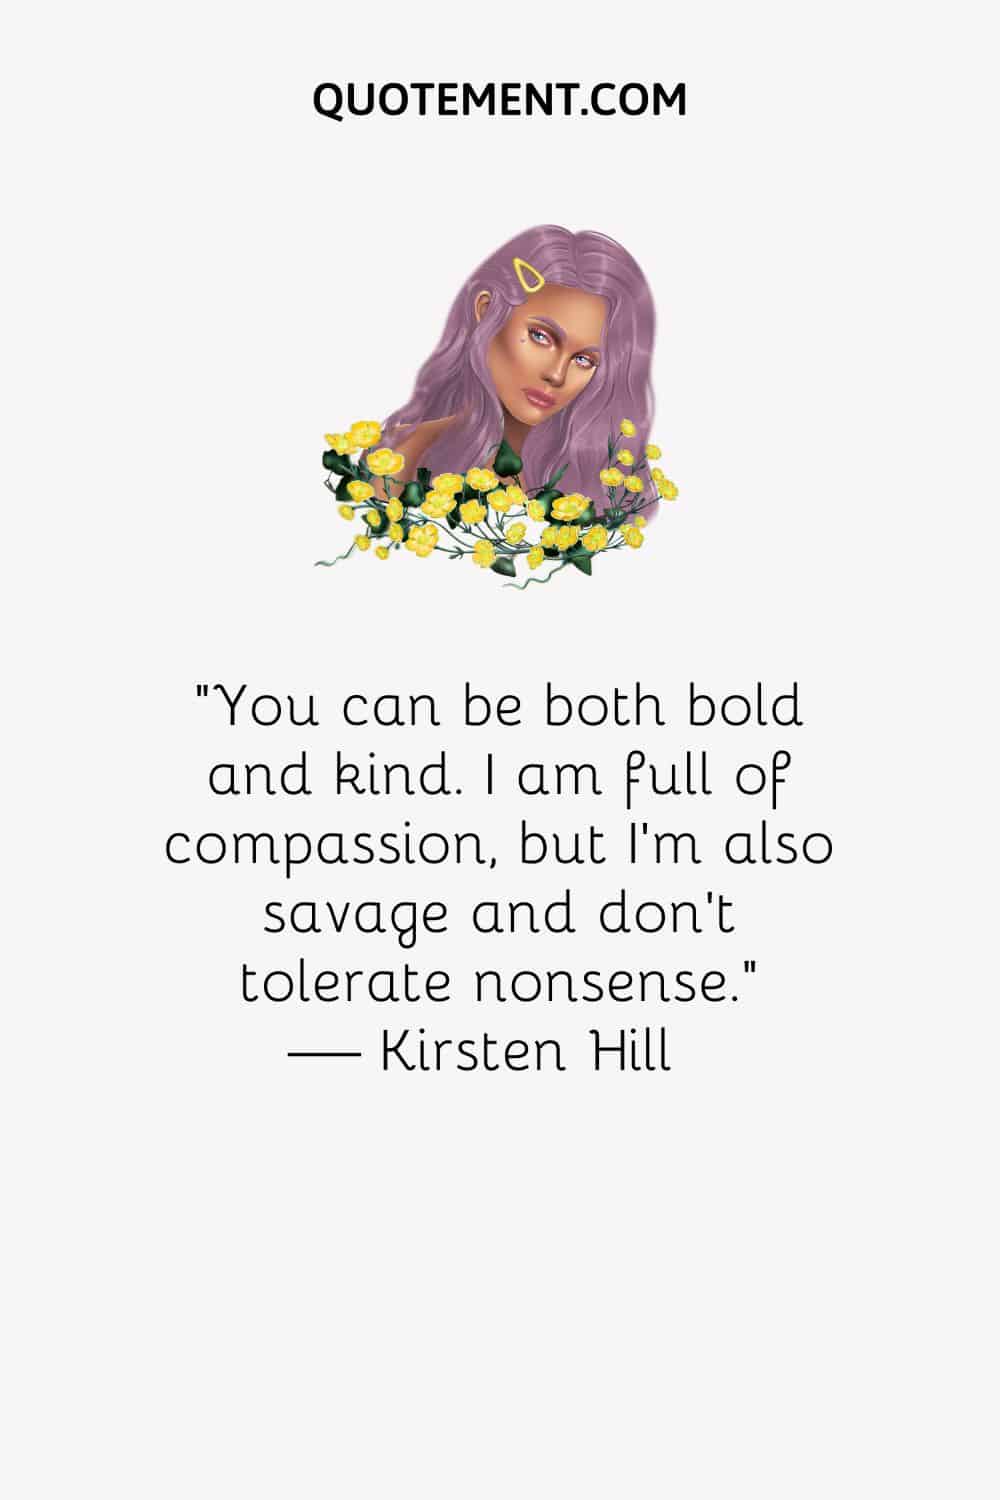 You can be both bold and kind. I am full of compassion, but I’m also savage and don’t tolerate nonsense